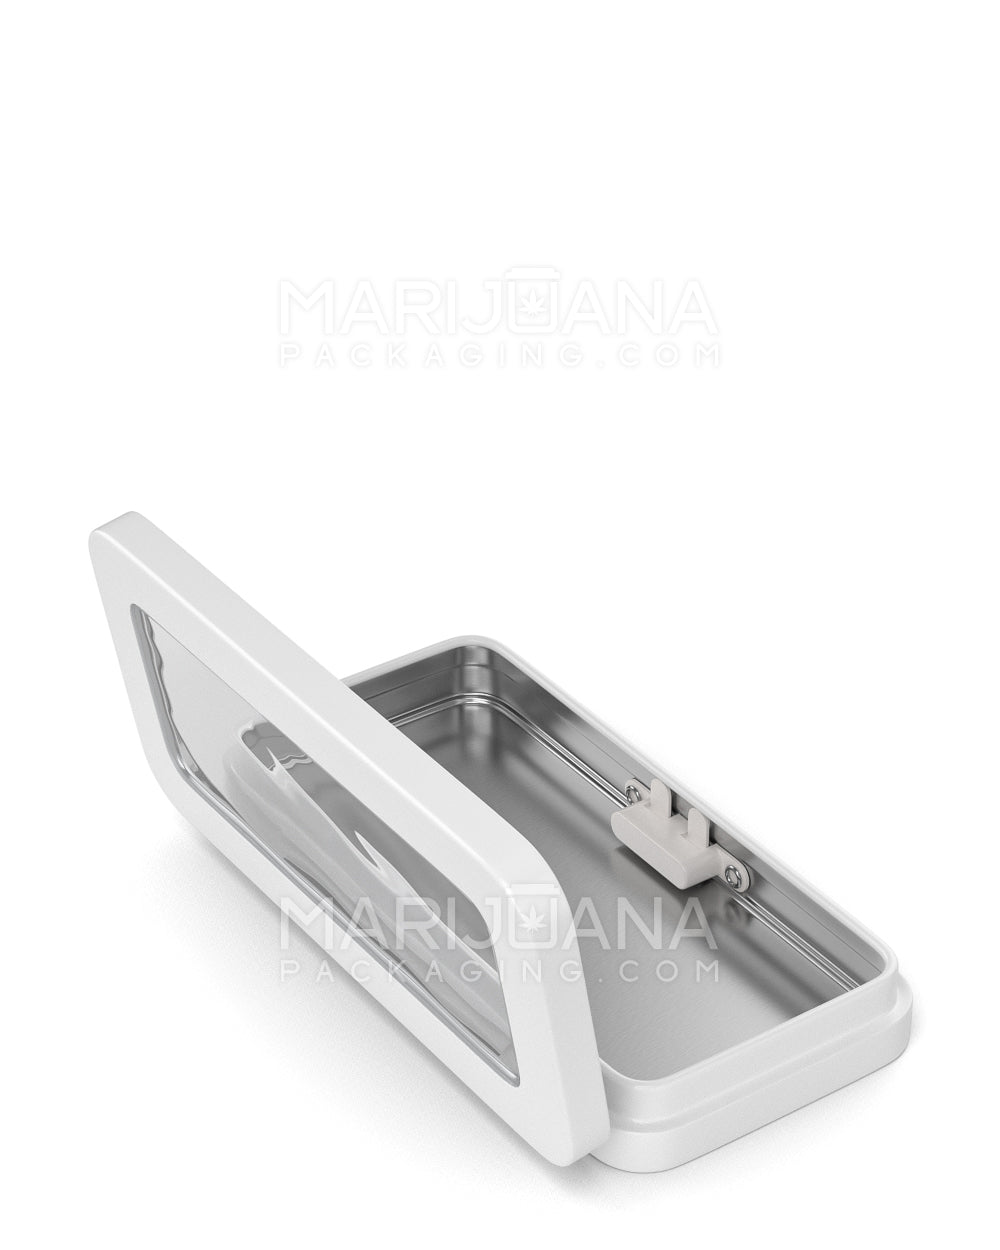 Child Resistant & Sustainable | Hinged-Lid Large Vista Edible & Joint Box w/ See-Through Window |  White Tin  - 7